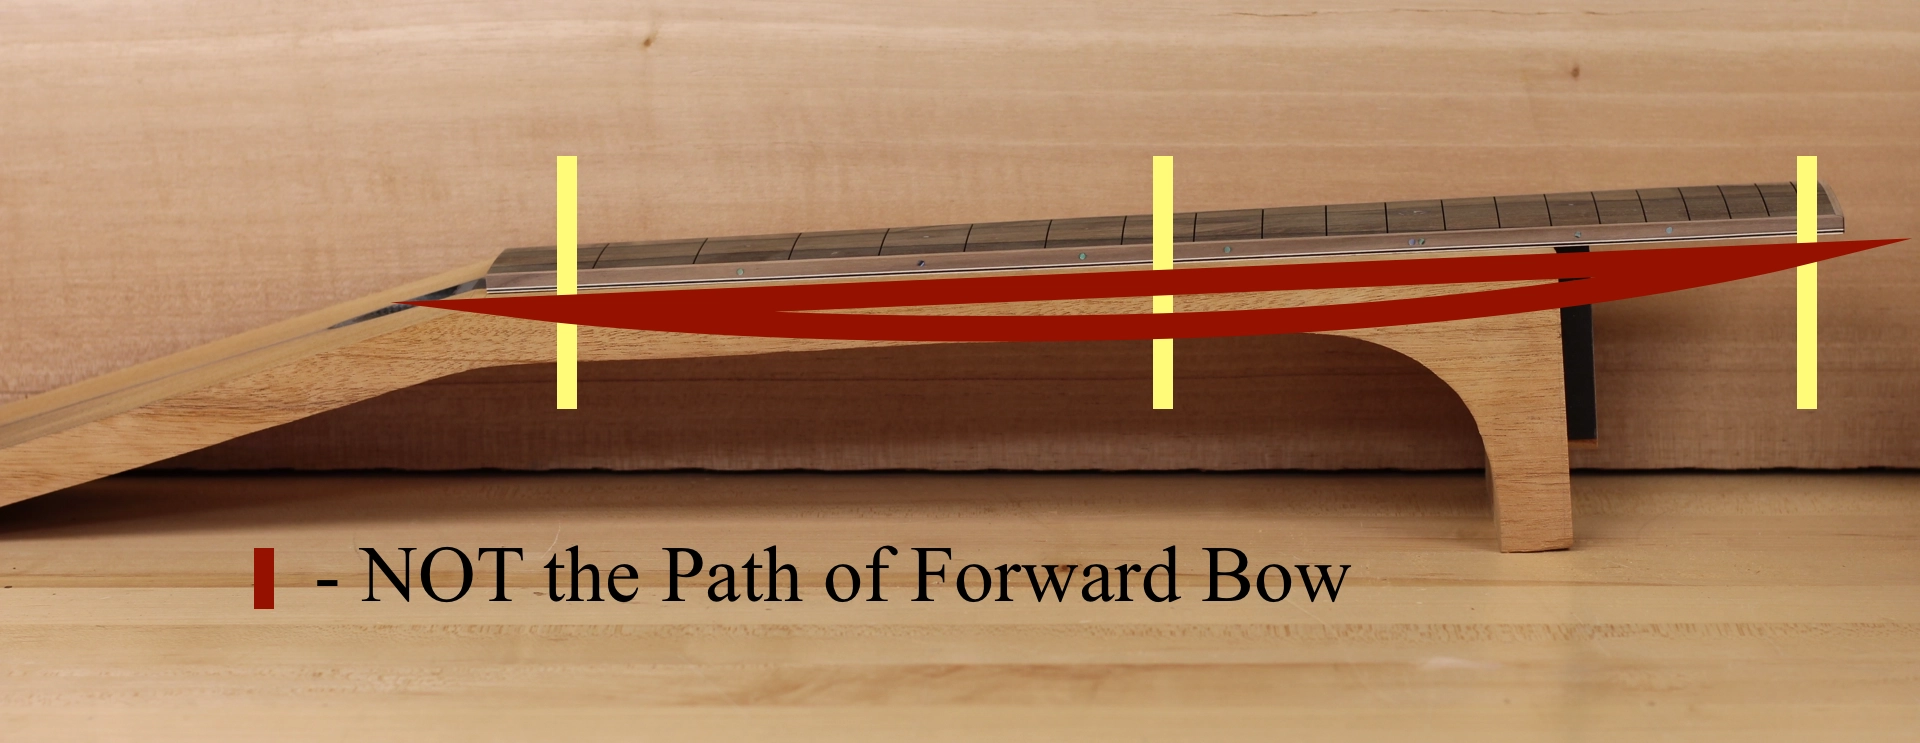 Not the forward Bow Path